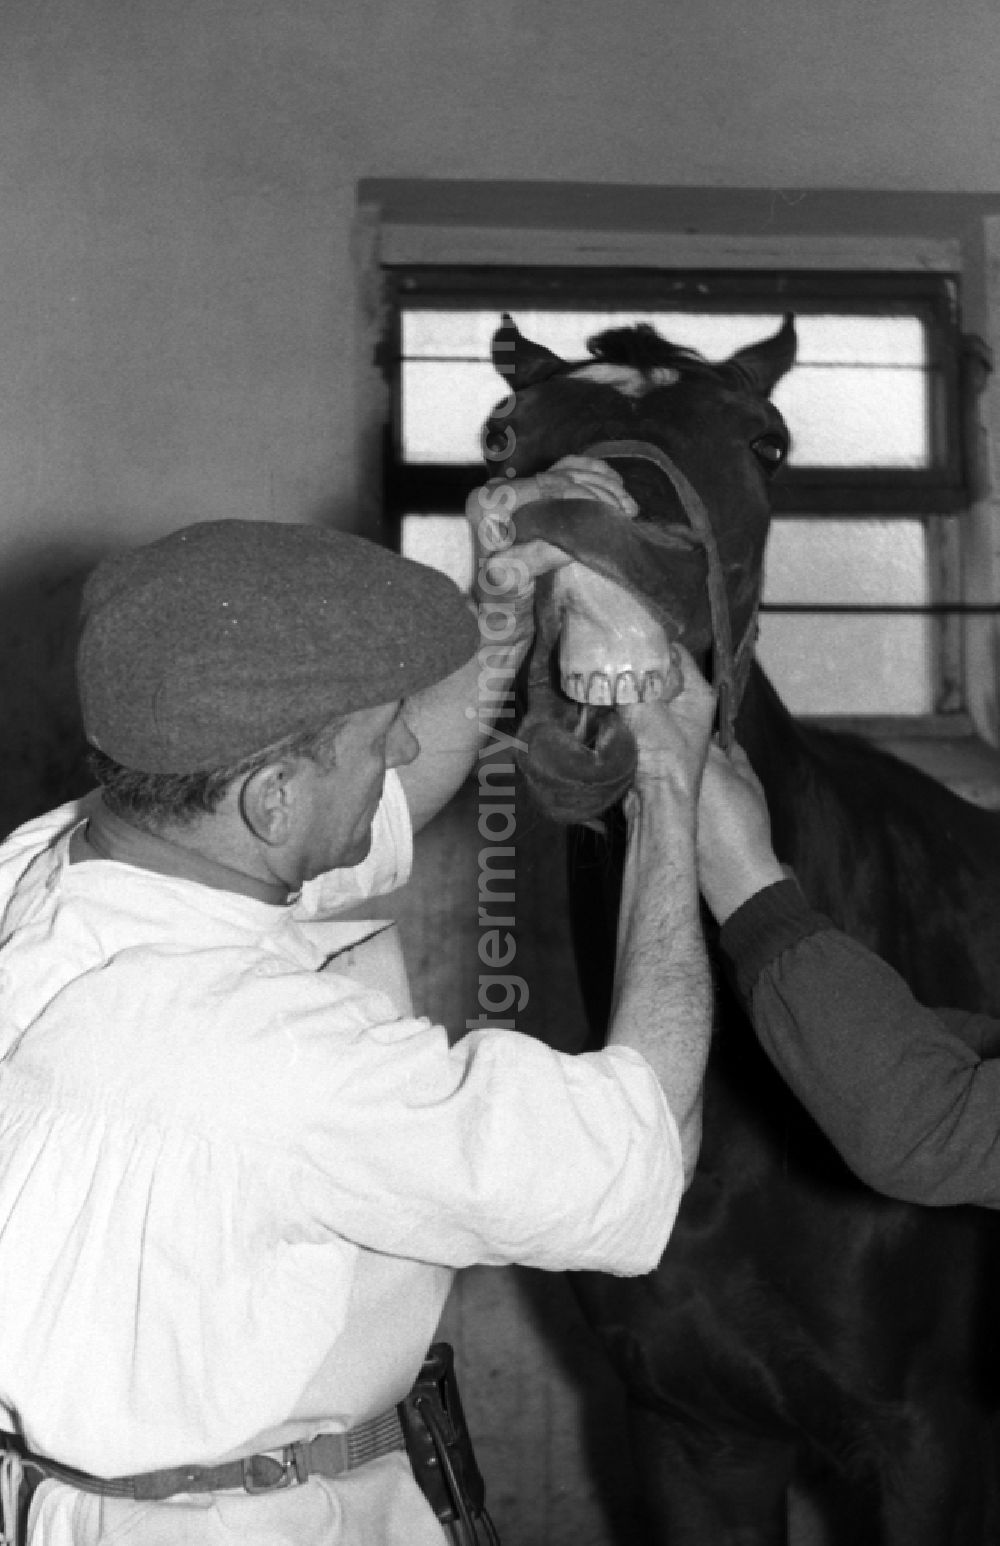 Hoppegarten: Veterinary surgeon treating the teeth of a horse in Hoppegarten in the state Brandenburg on the territory of the former GDR, German Democratic Republic